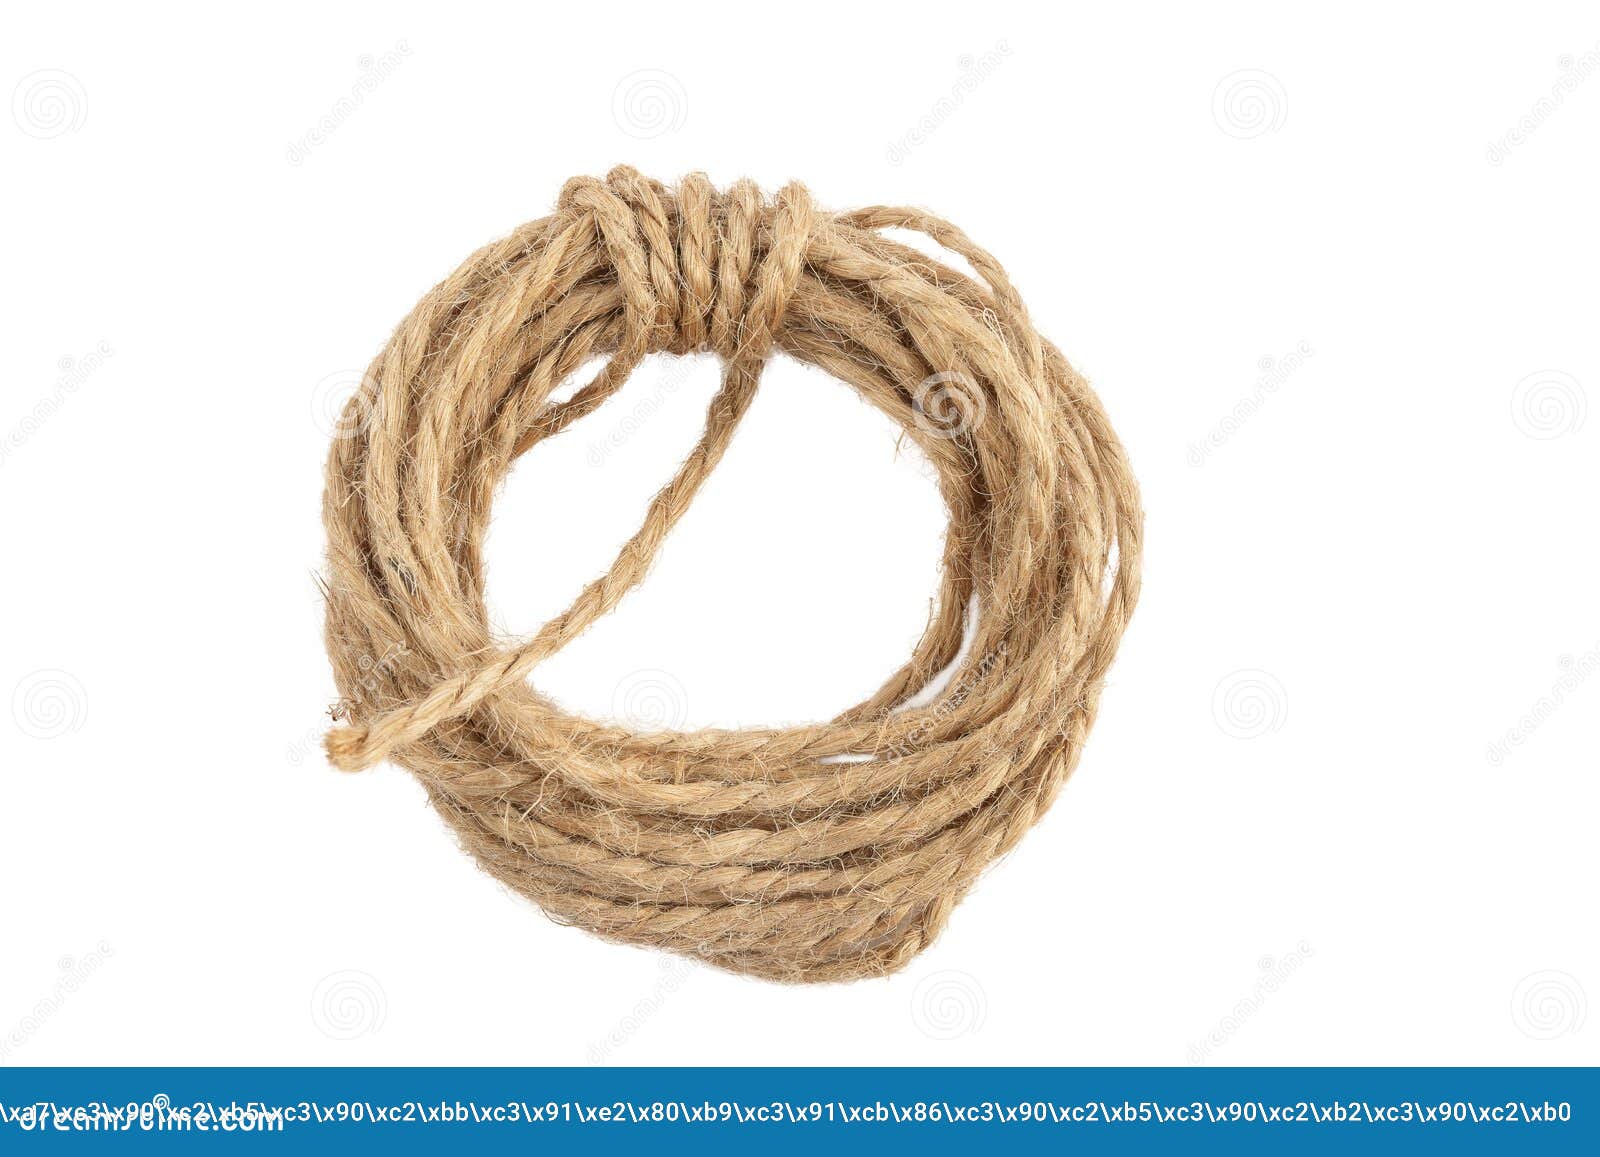 Packing Rope Made of Jute with a Tied Bow, Isolate for Clipping on